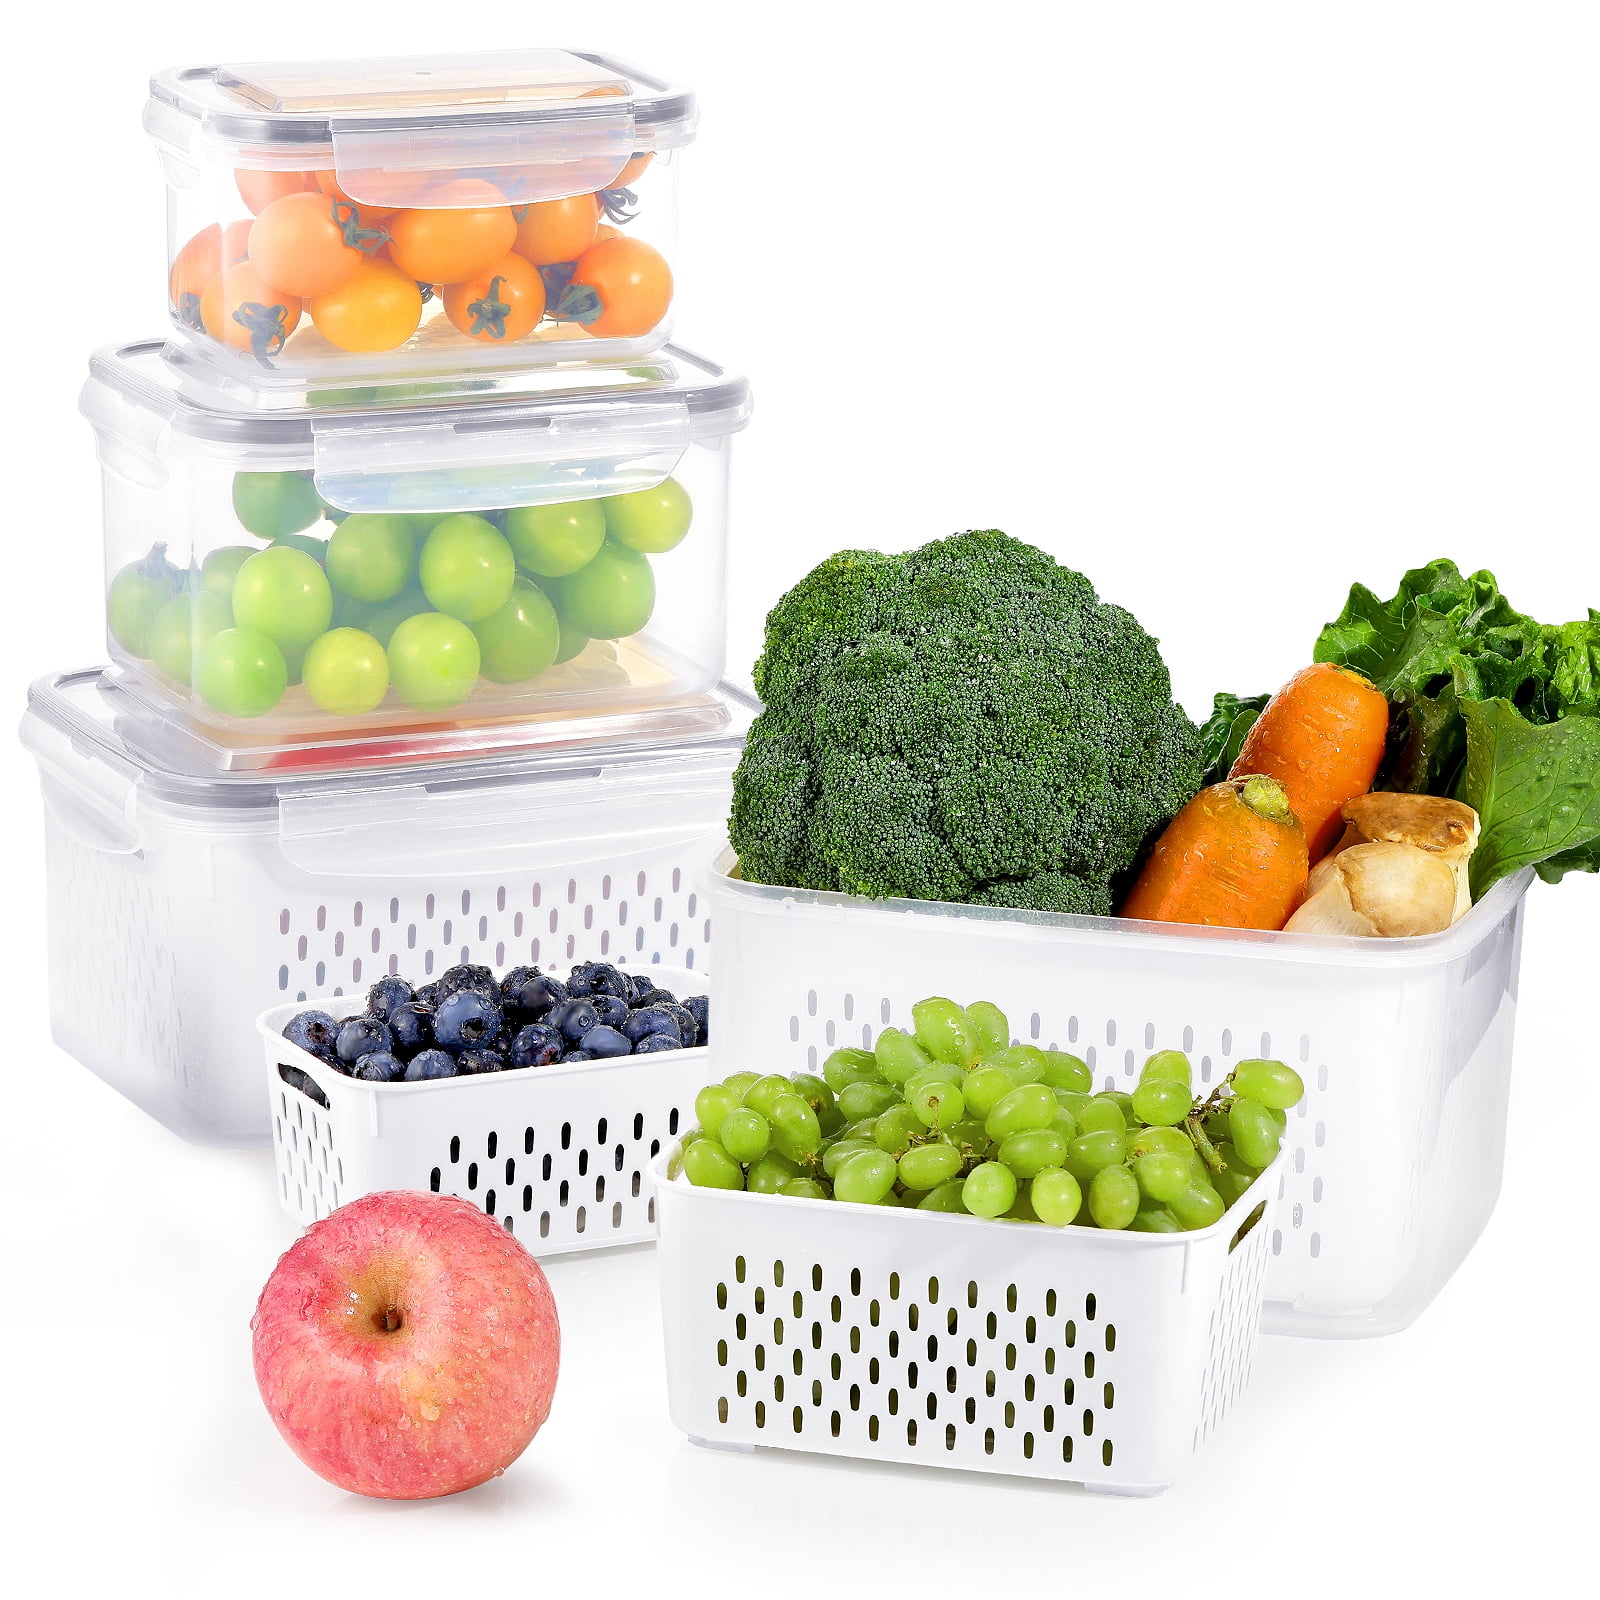 5 PCS Large Fruit Containers for Fridge,Leakproof Food Storage organizer  with lids Removable Colander,BPA-Free Produce saver Bins for refrigerator